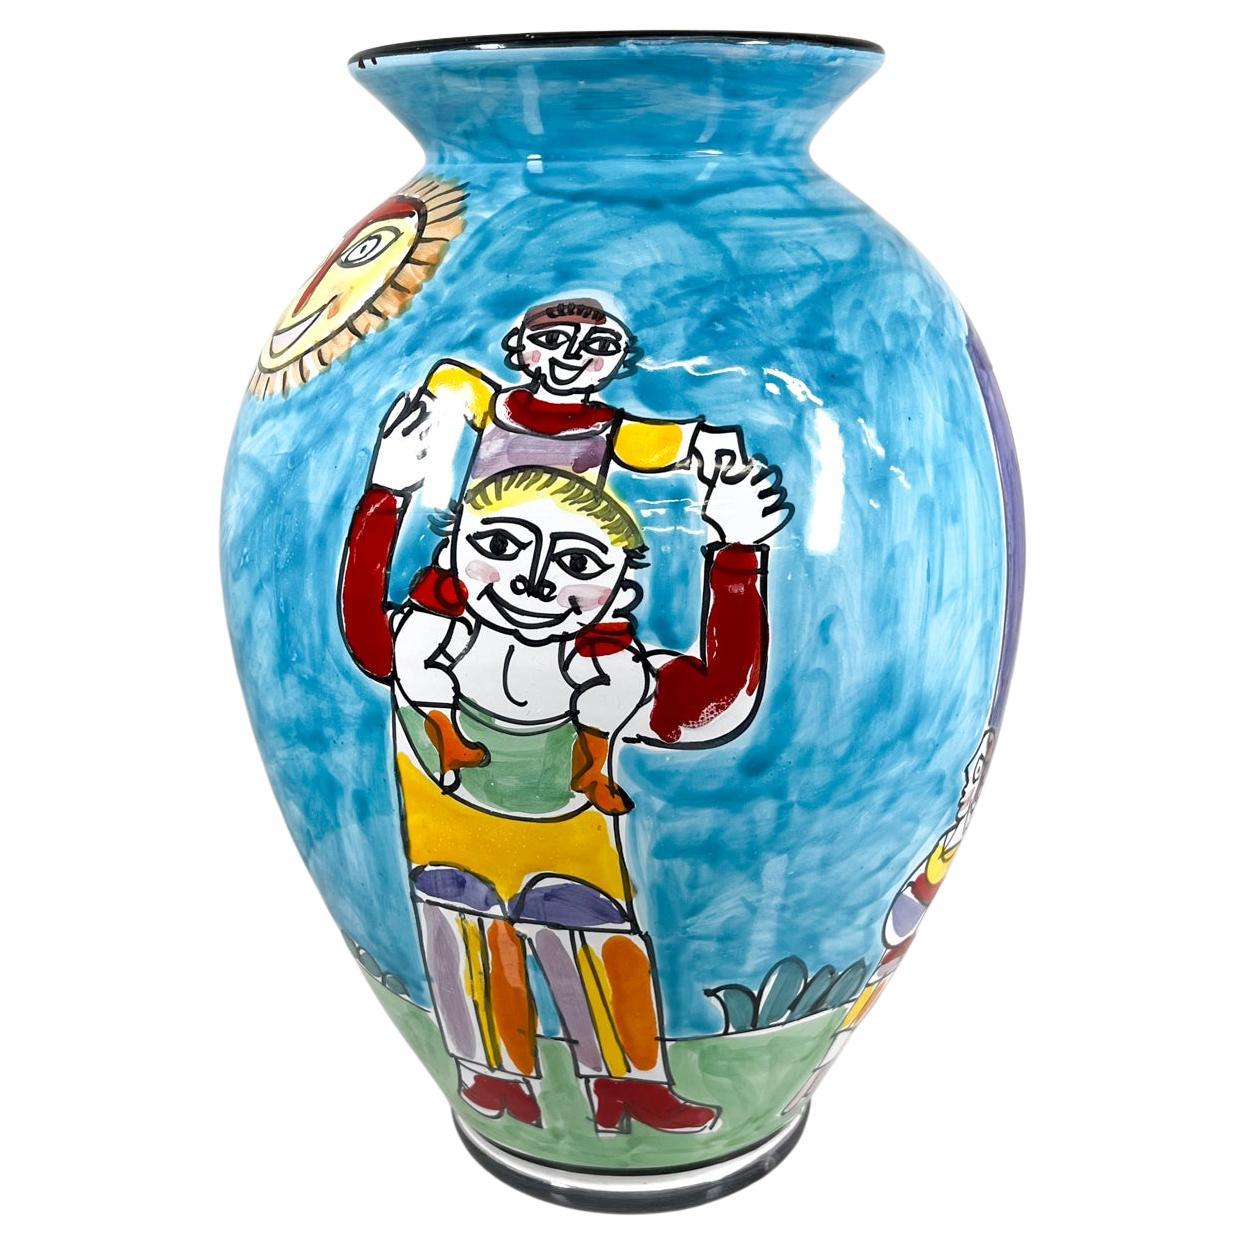 1960s Italy Hand Painted Collections Colorful Ceramic Vase Happy Family
15 h x 9.5 diameter
Stamped by maker.
Preowned vintage condition
See images please.